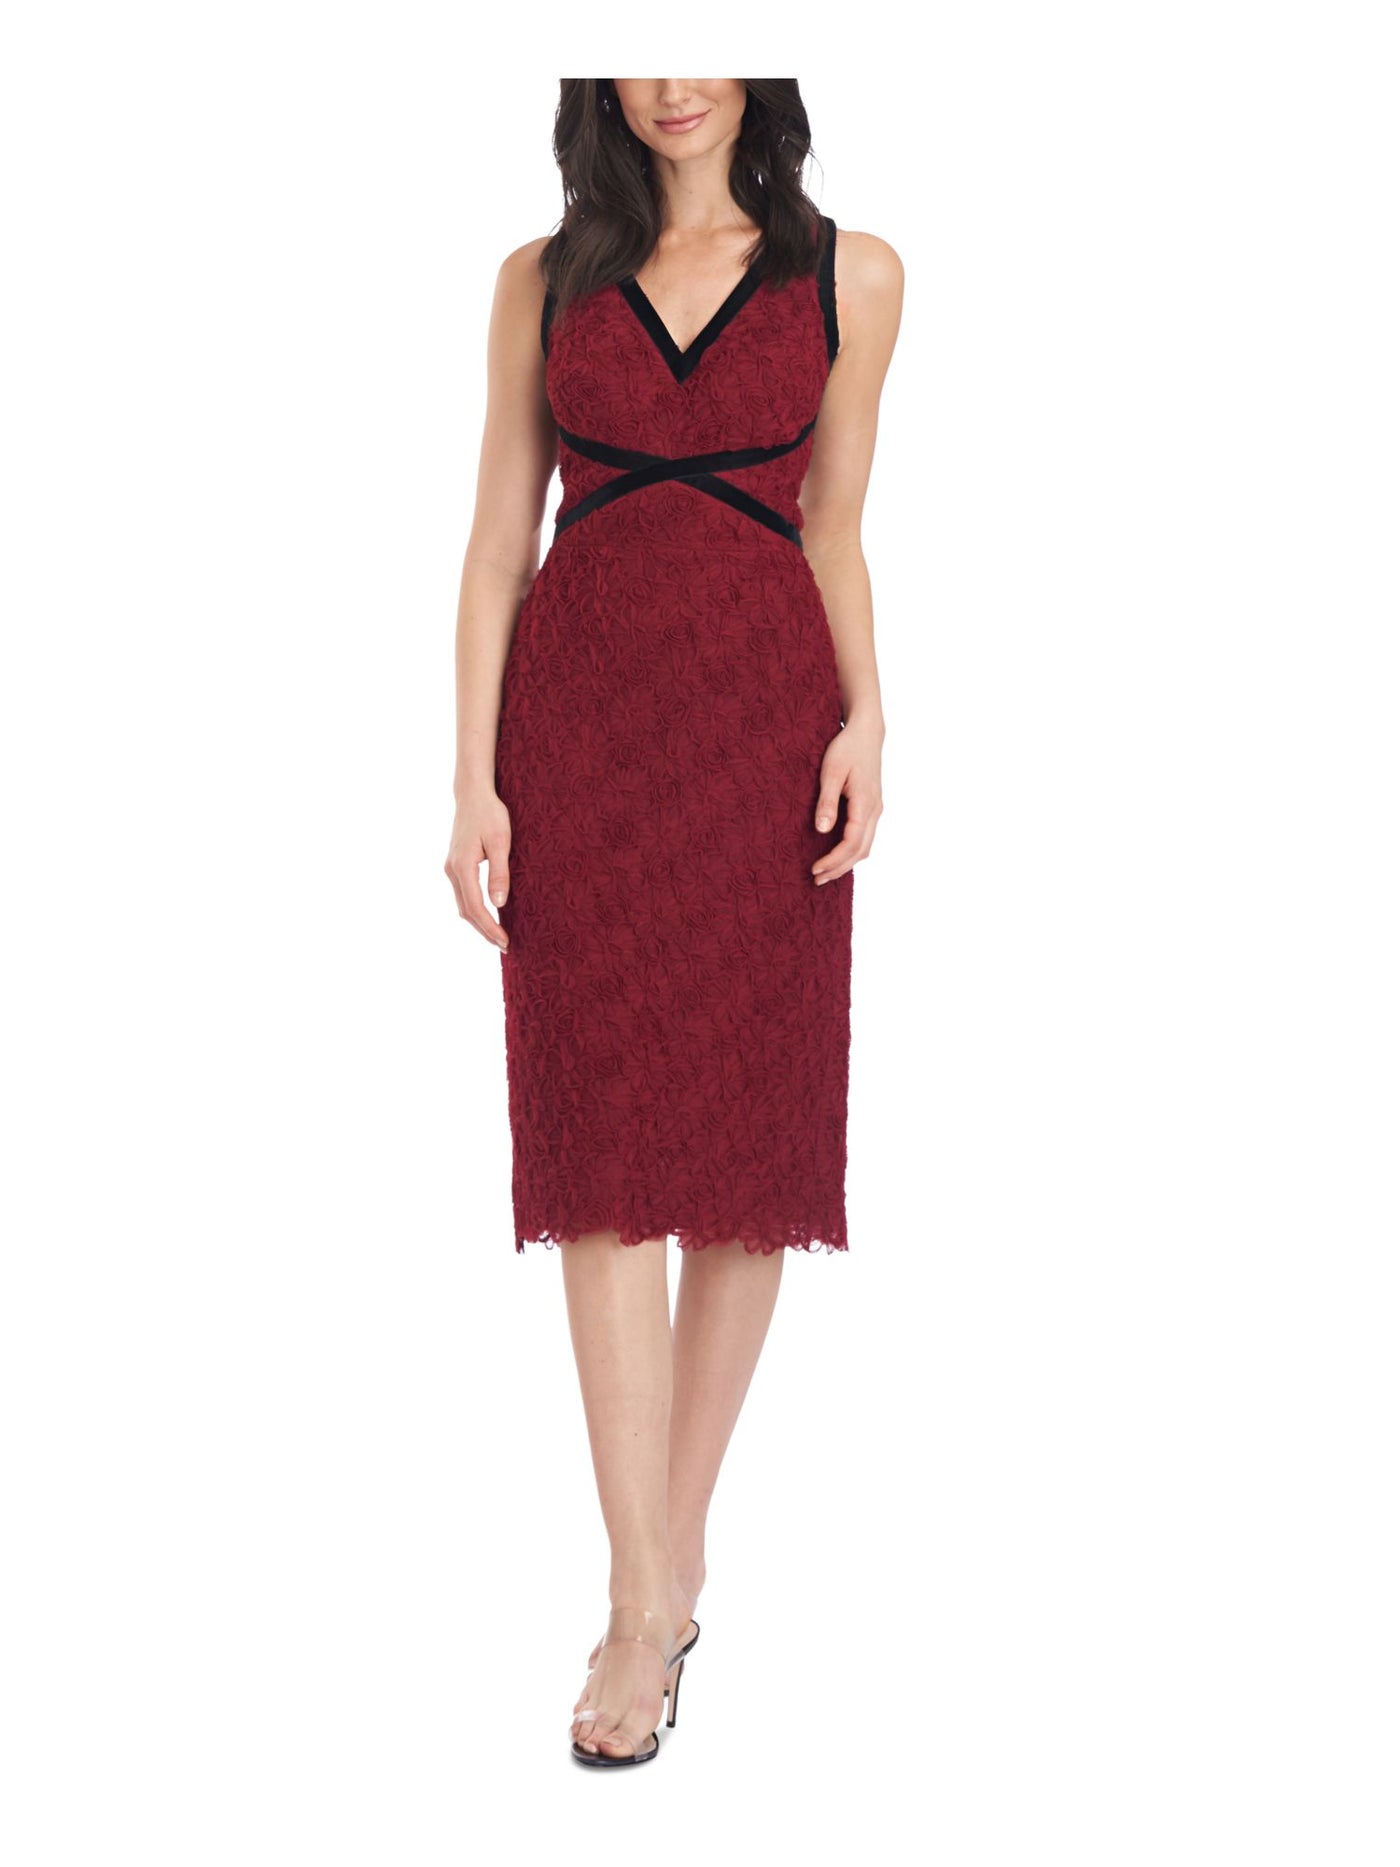 JS COLLECTION Womens Zippered Contrast Velvet Trim Lined Sleeveless V Neck Below The Knee Party Body Con Dress